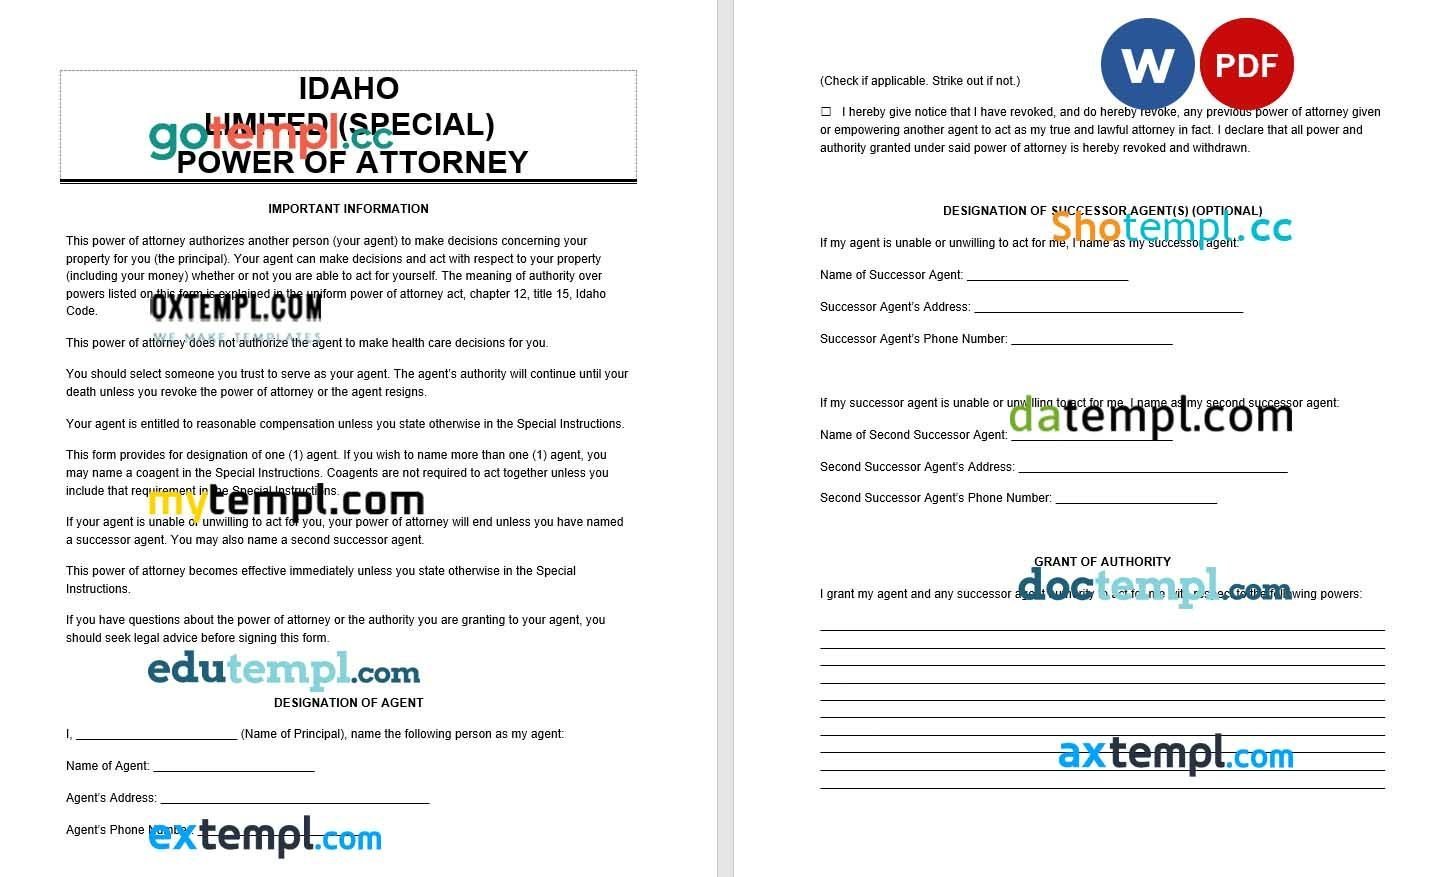 Idaho Limited Power of Attorney example, fully editable